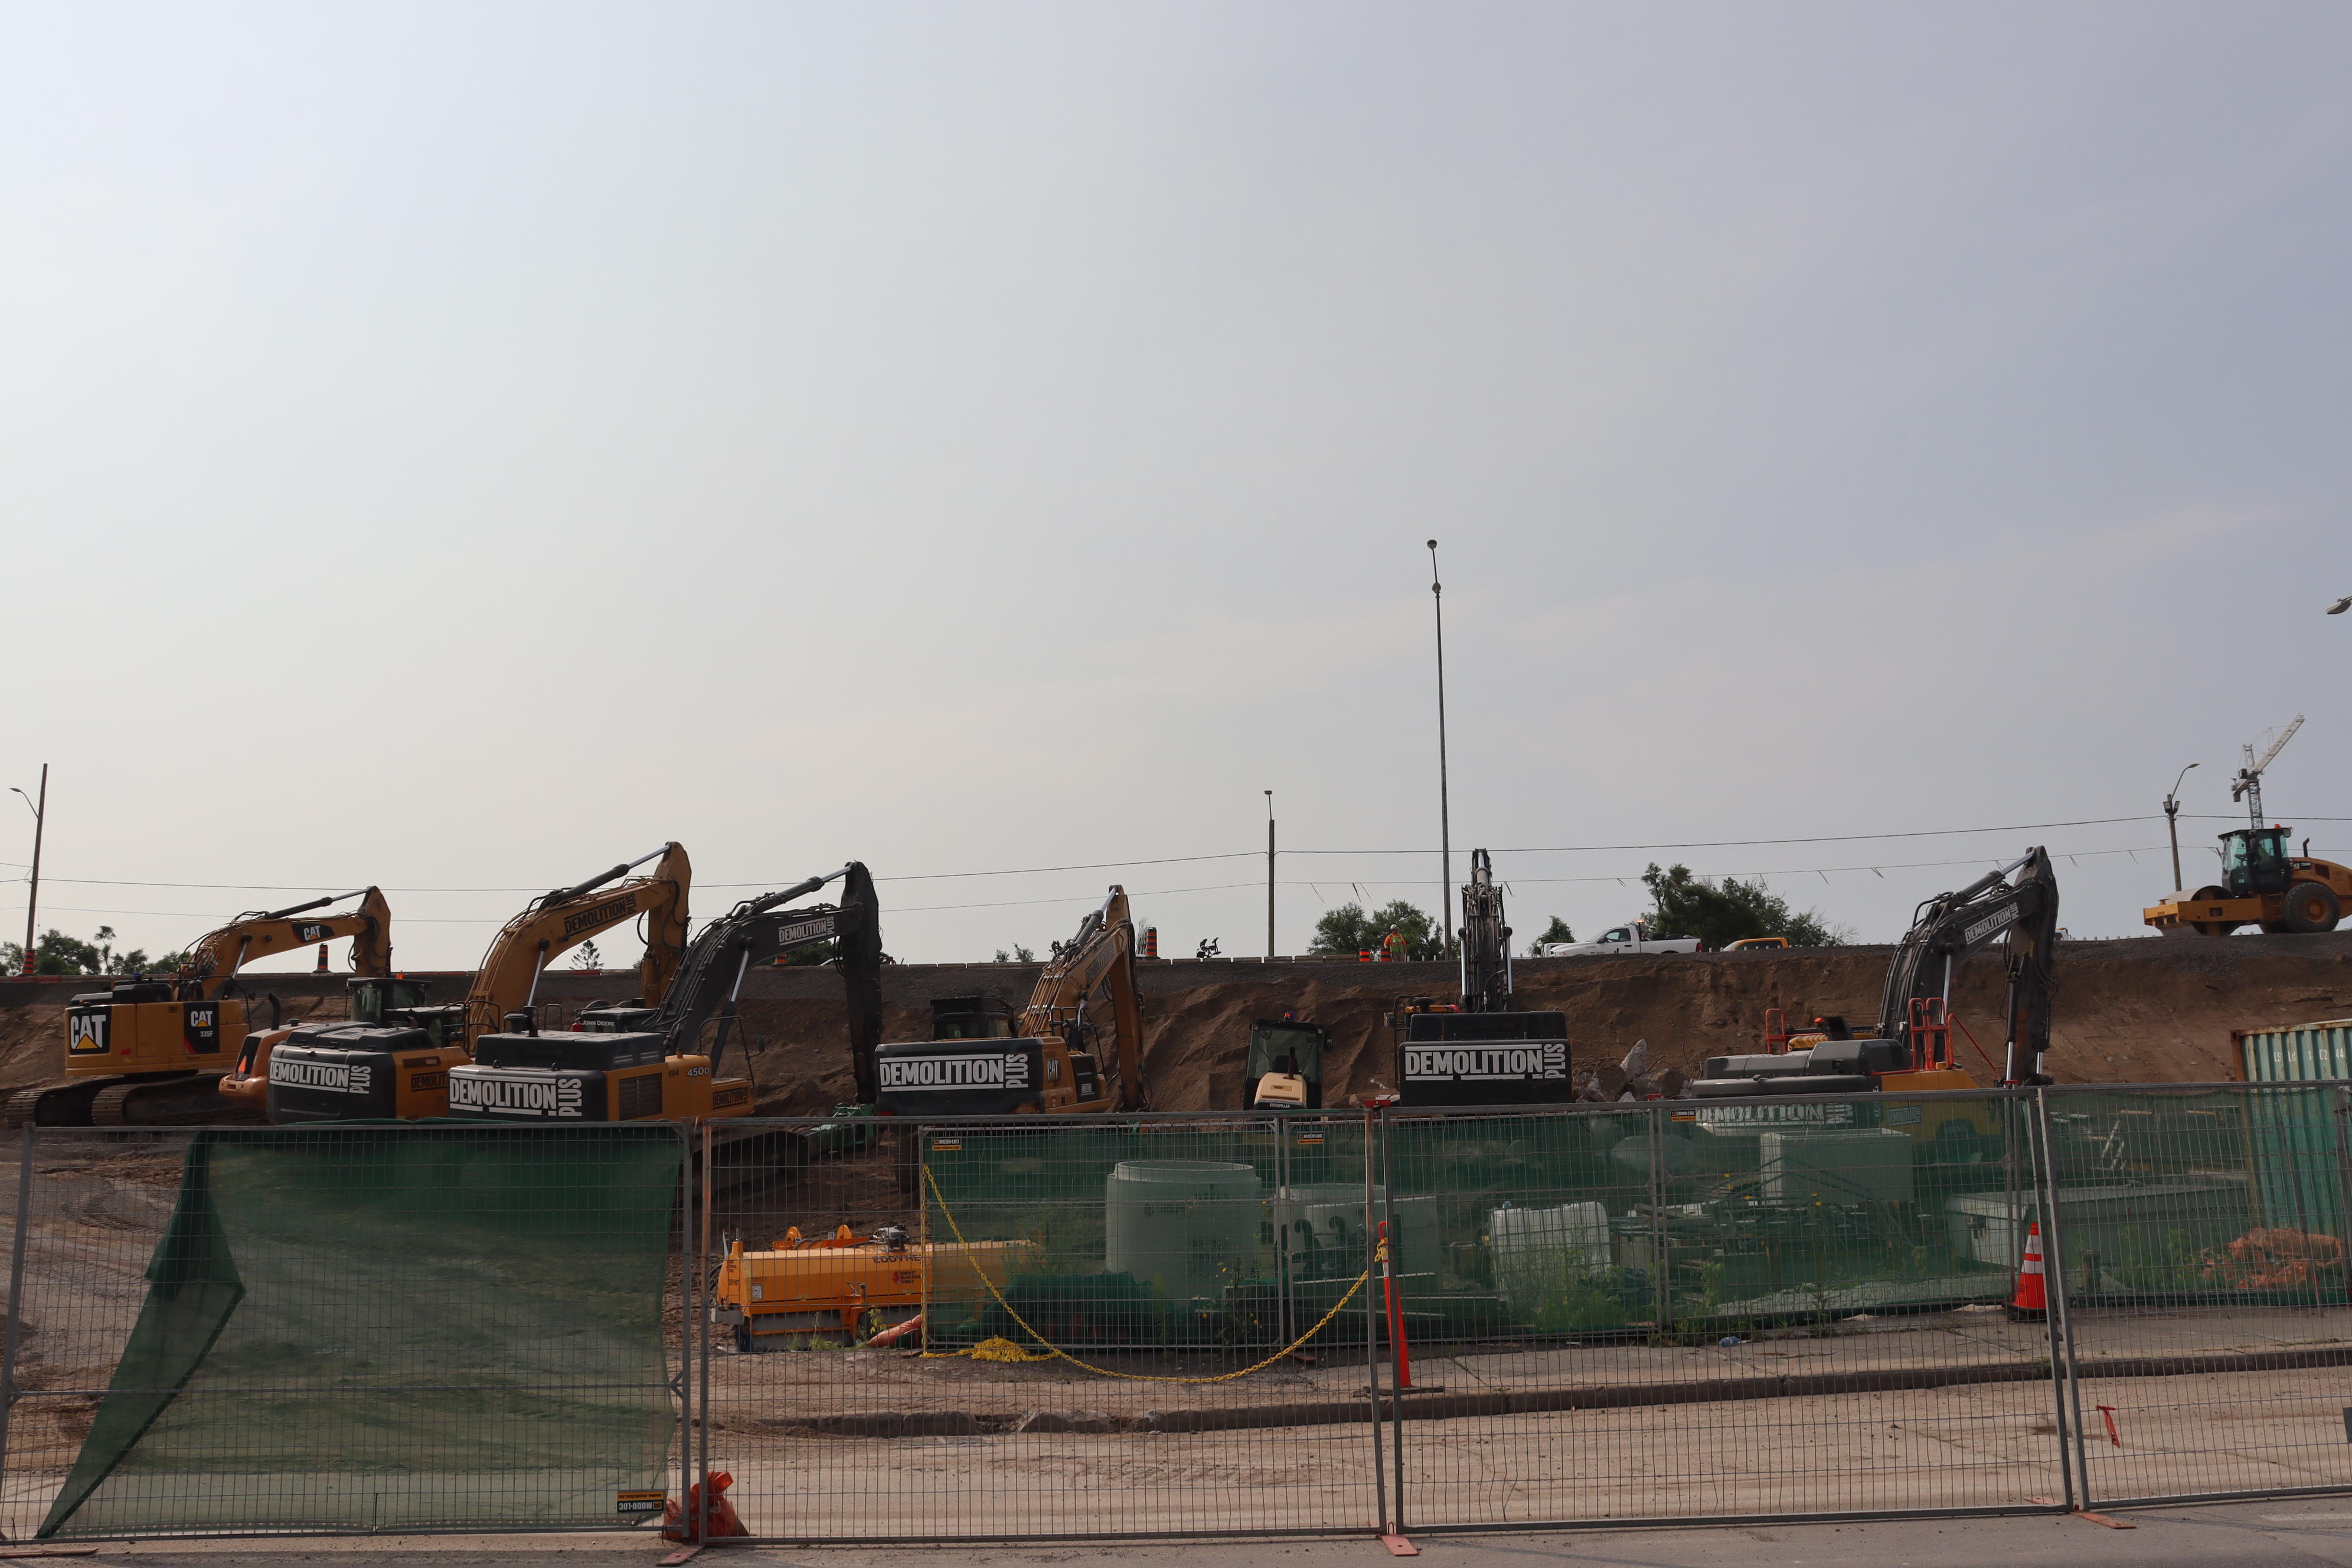 A row of excavators and other construction machinery, behind a temporary fence.